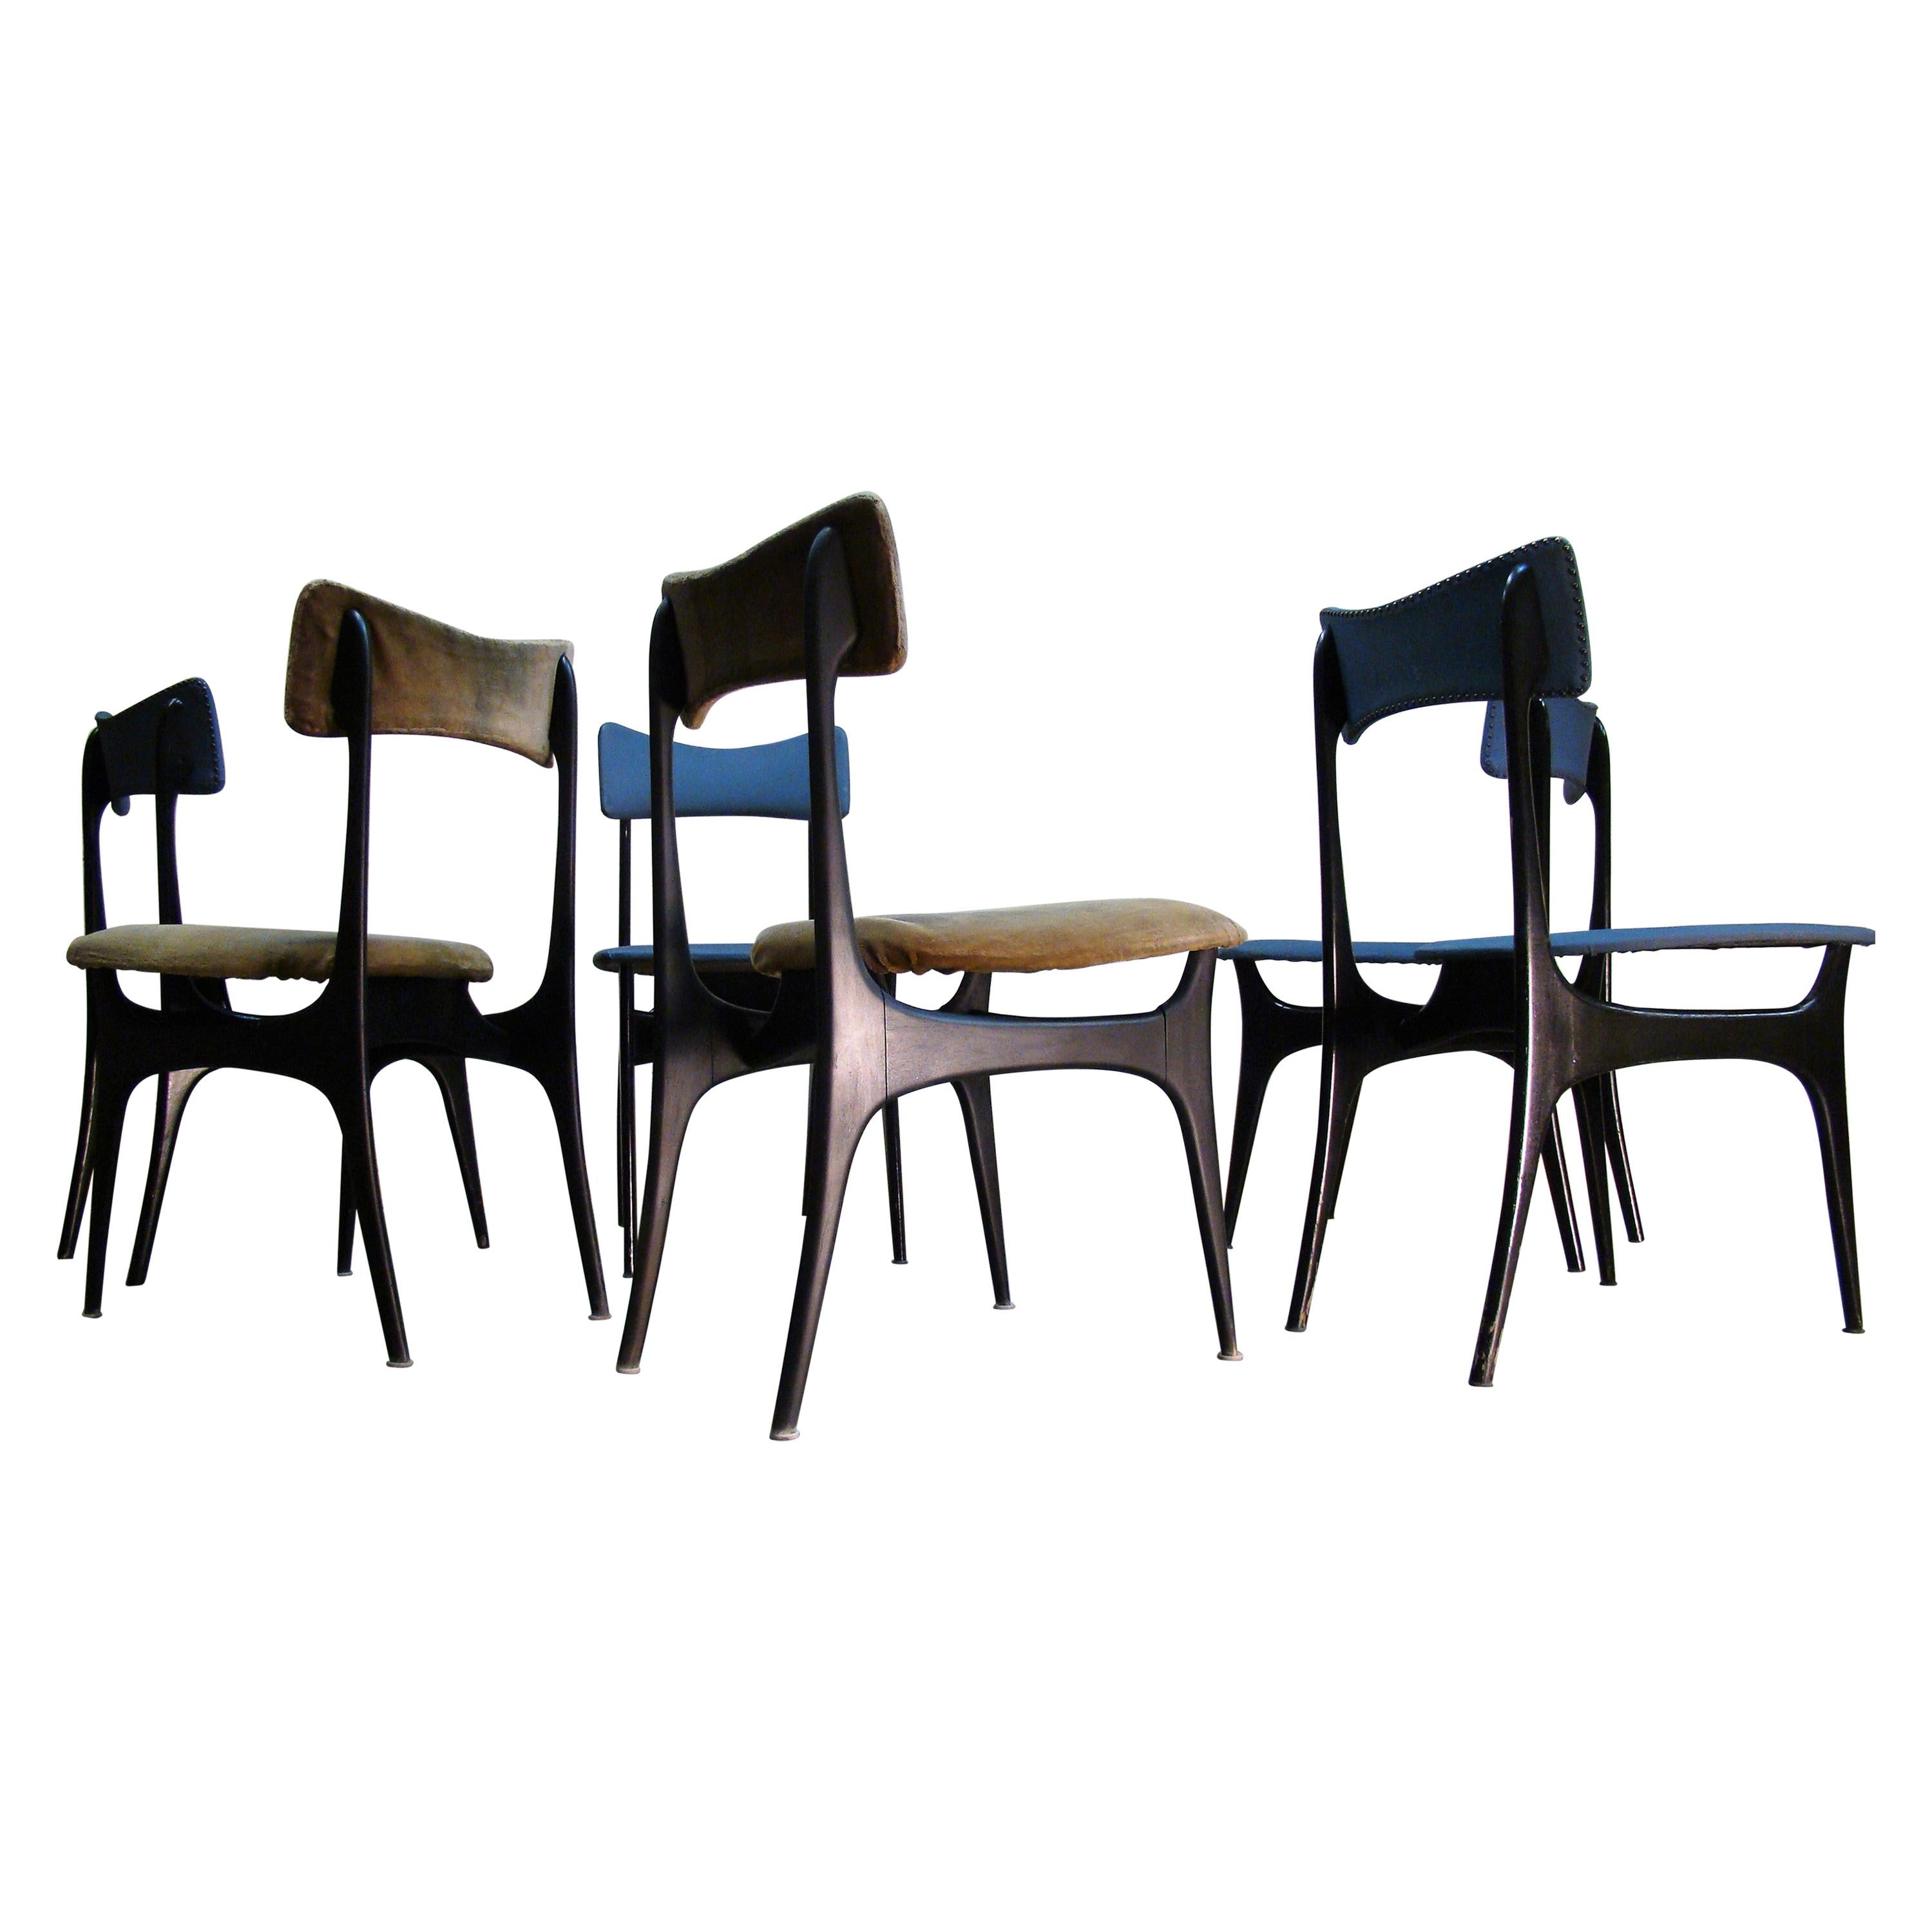 Rare Set of Six Teak Dining Chairs by Alfred Hendrickx for Belform, 1950s For Sale